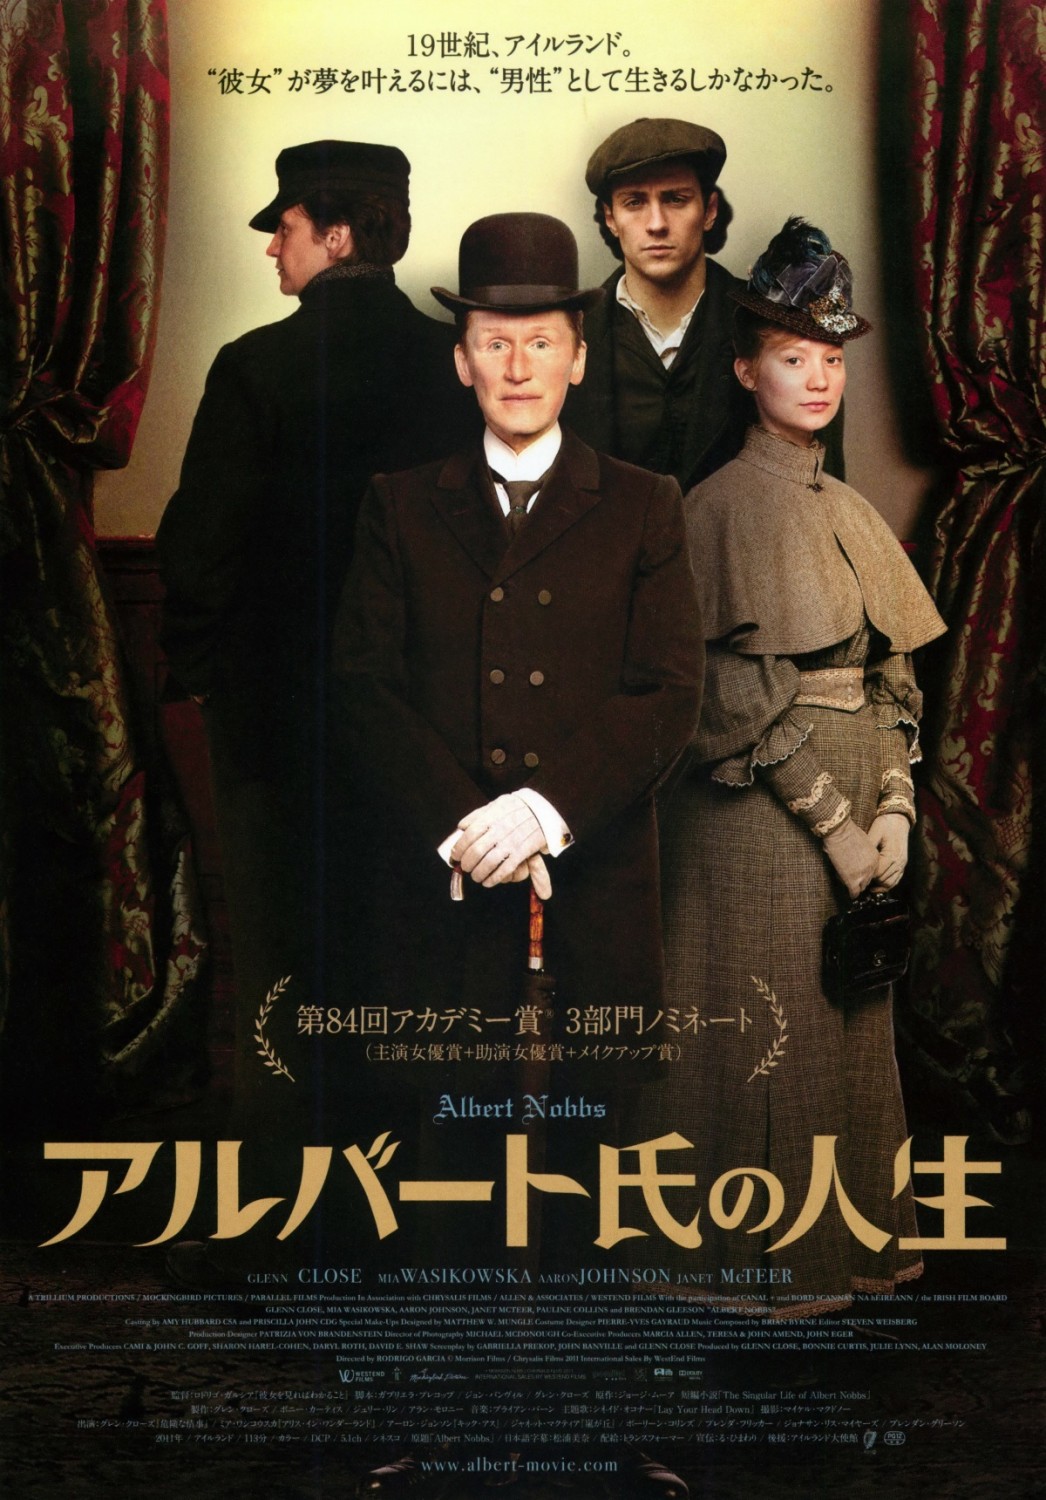 Extra Large Movie Poster Image for Albert Nobbs (#5 of 6)